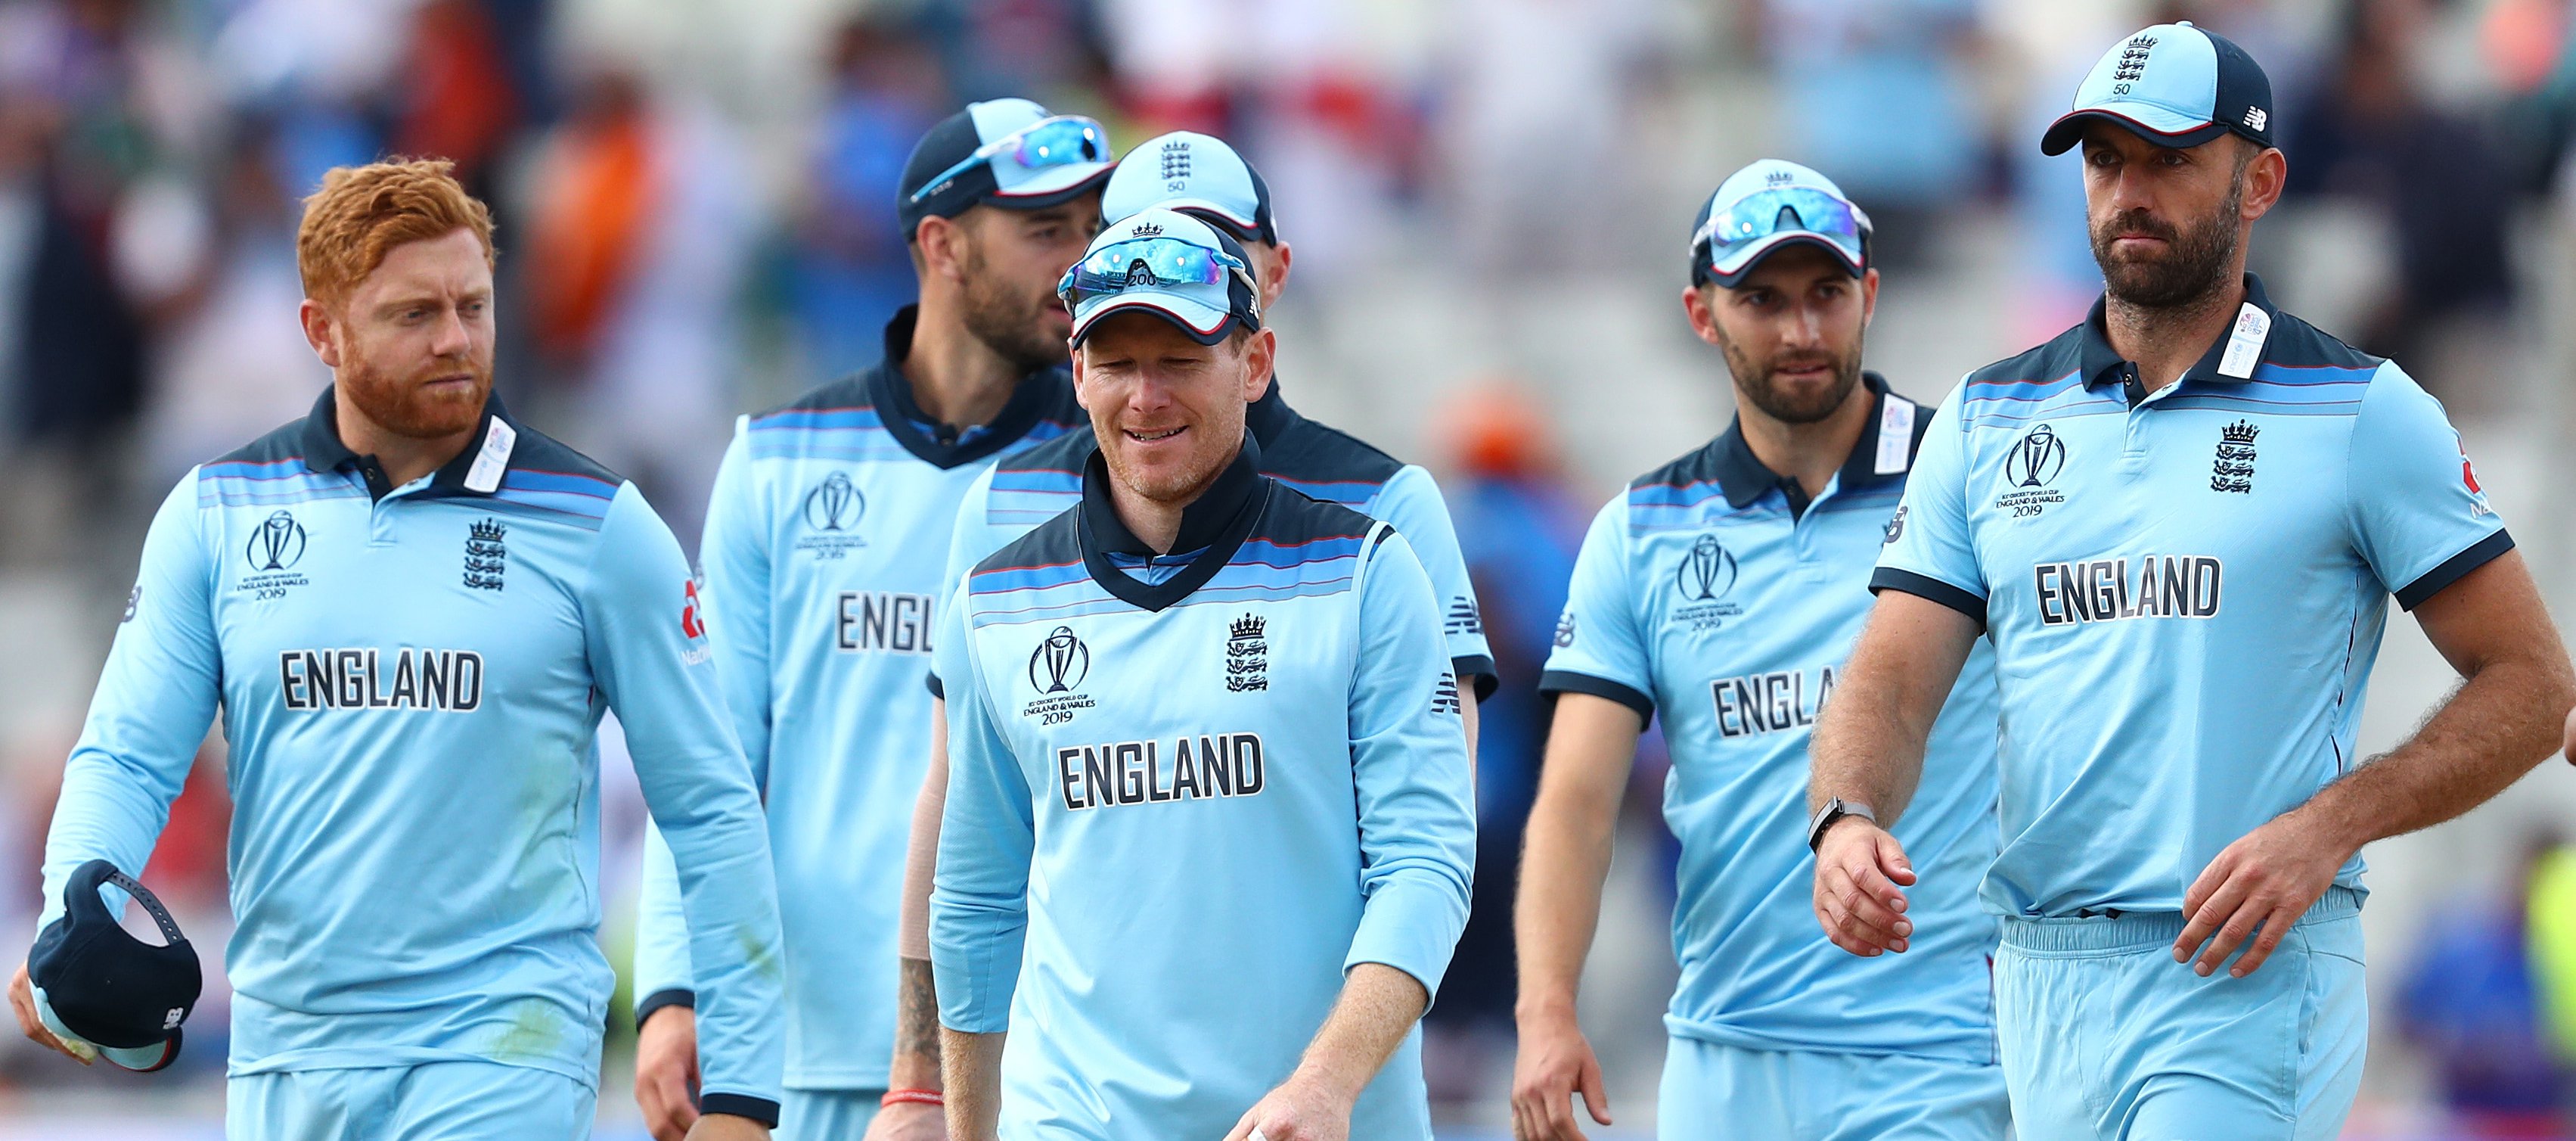 If England reach to Final, World Cup 2019 final will be free-to-air